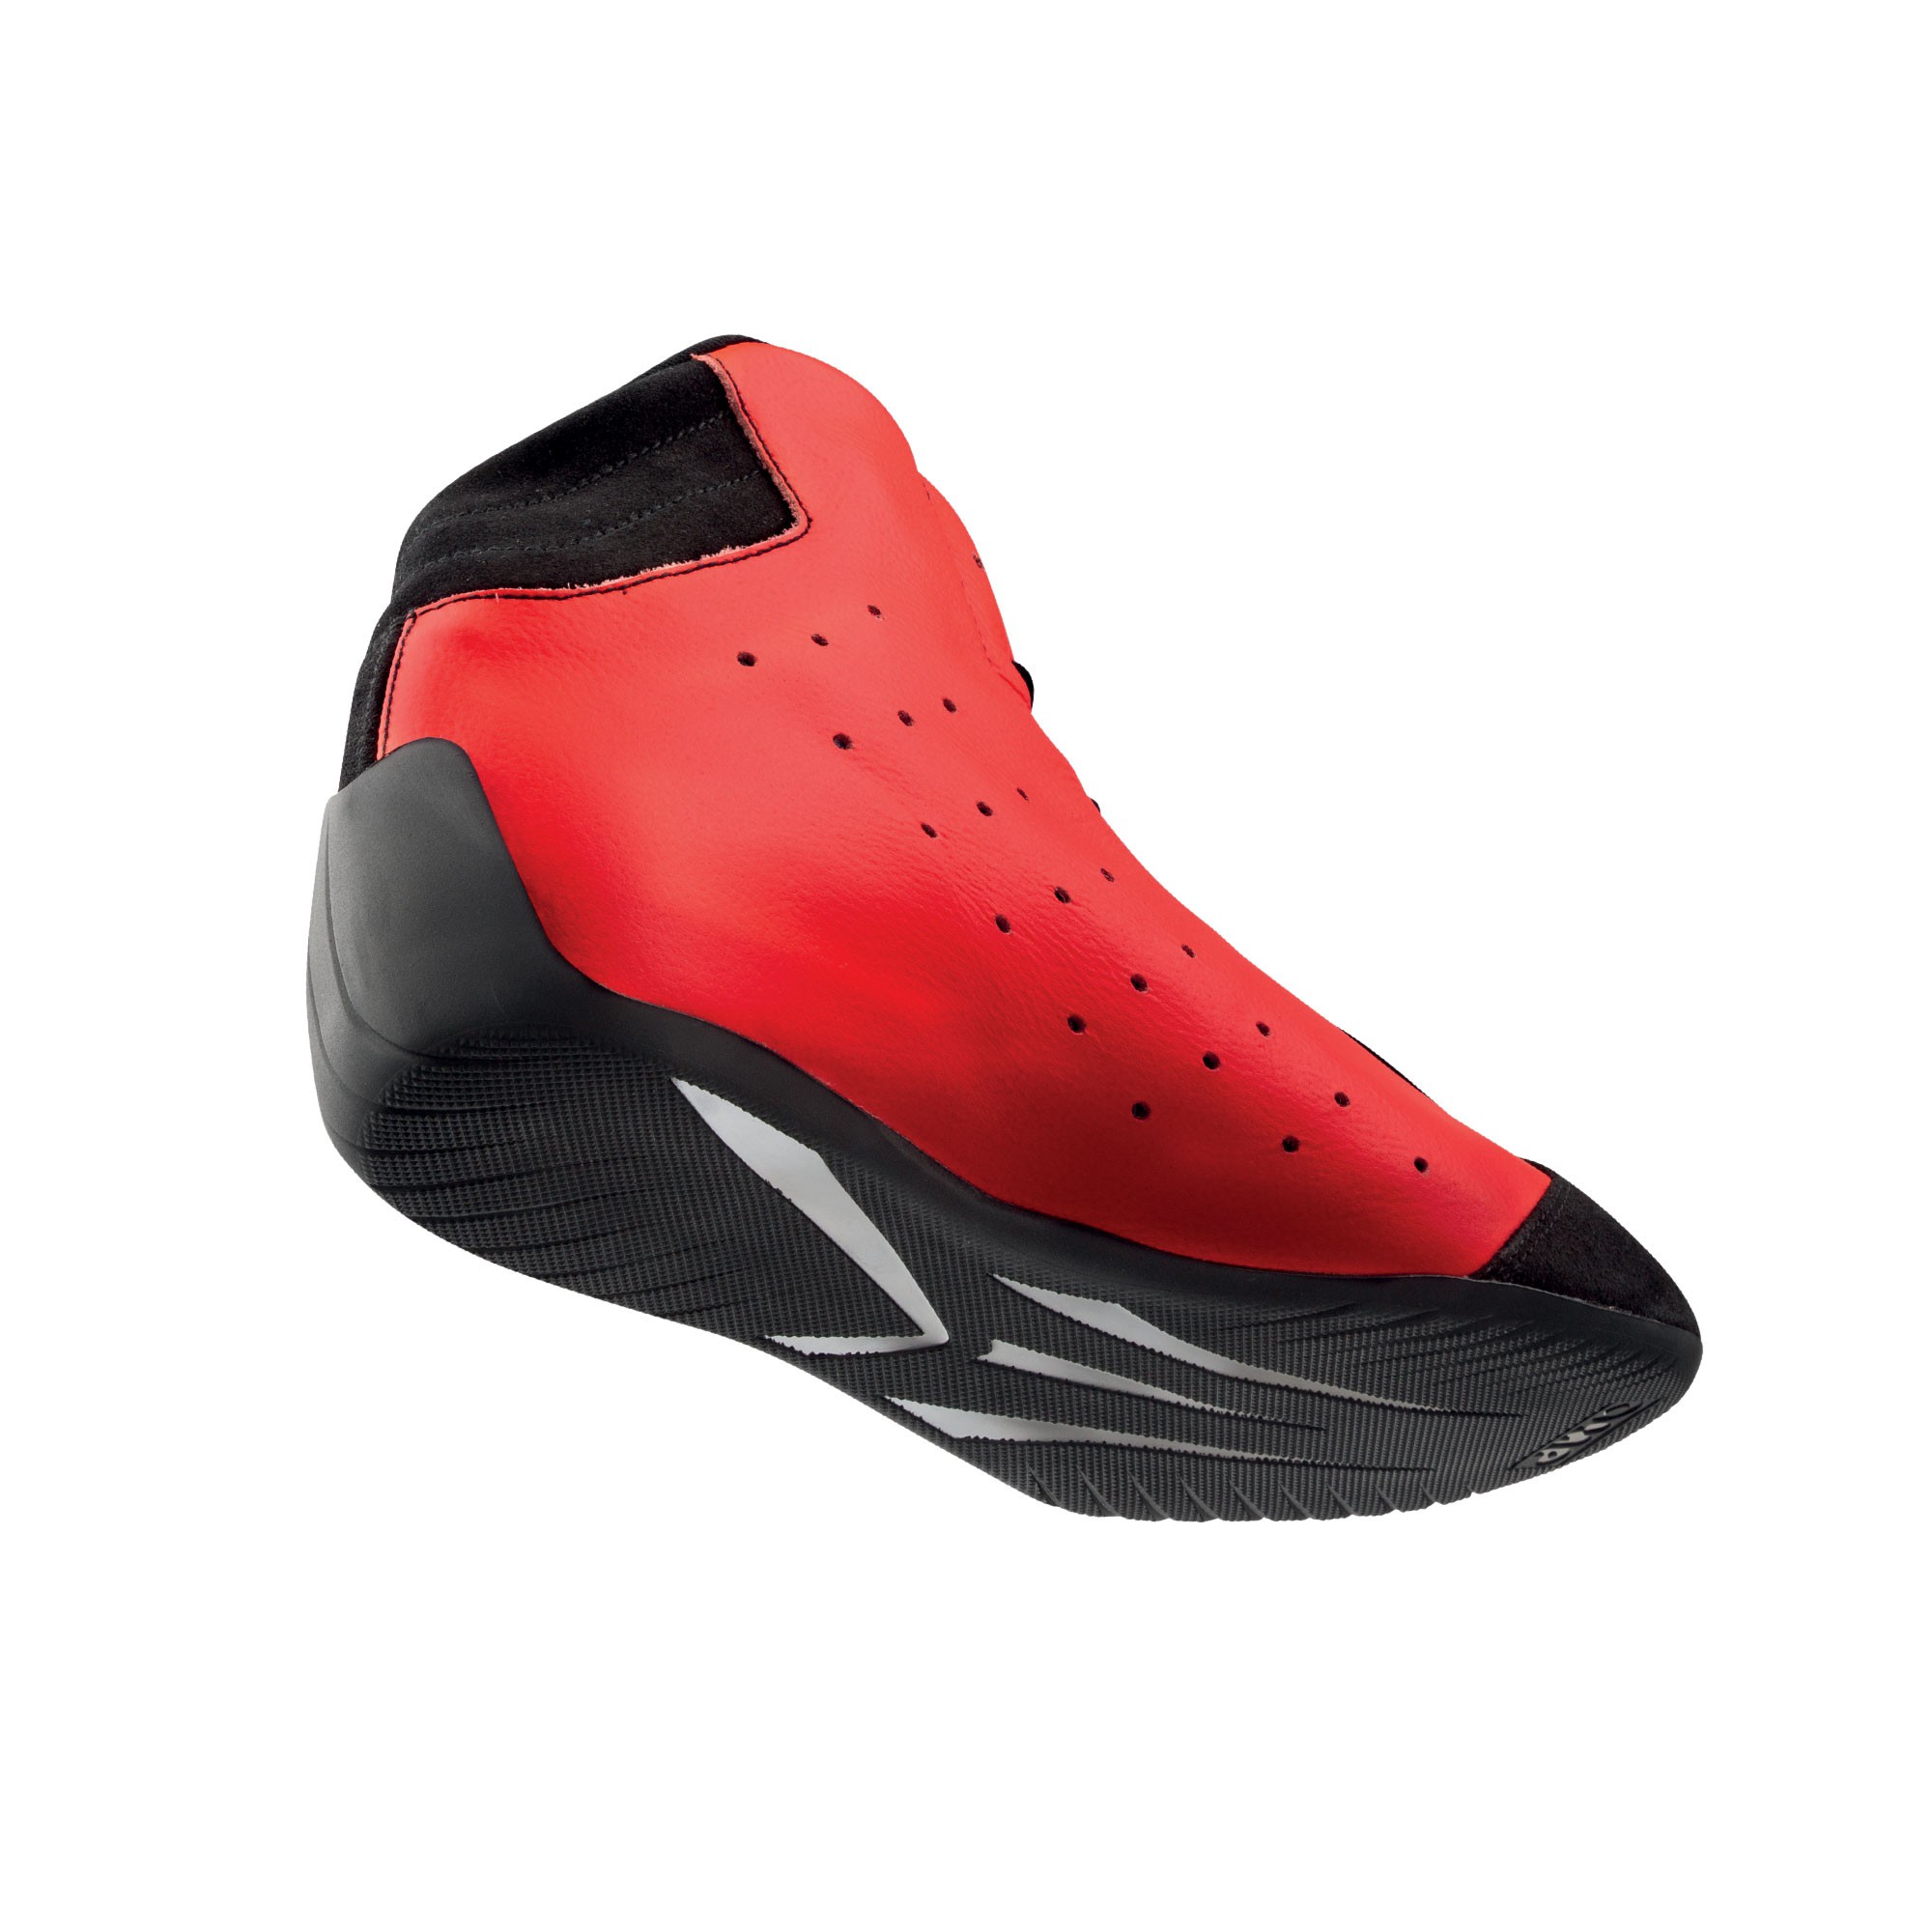 IC/80306138 Tecnica Evo Shoes, Red, Size 38 OMP 